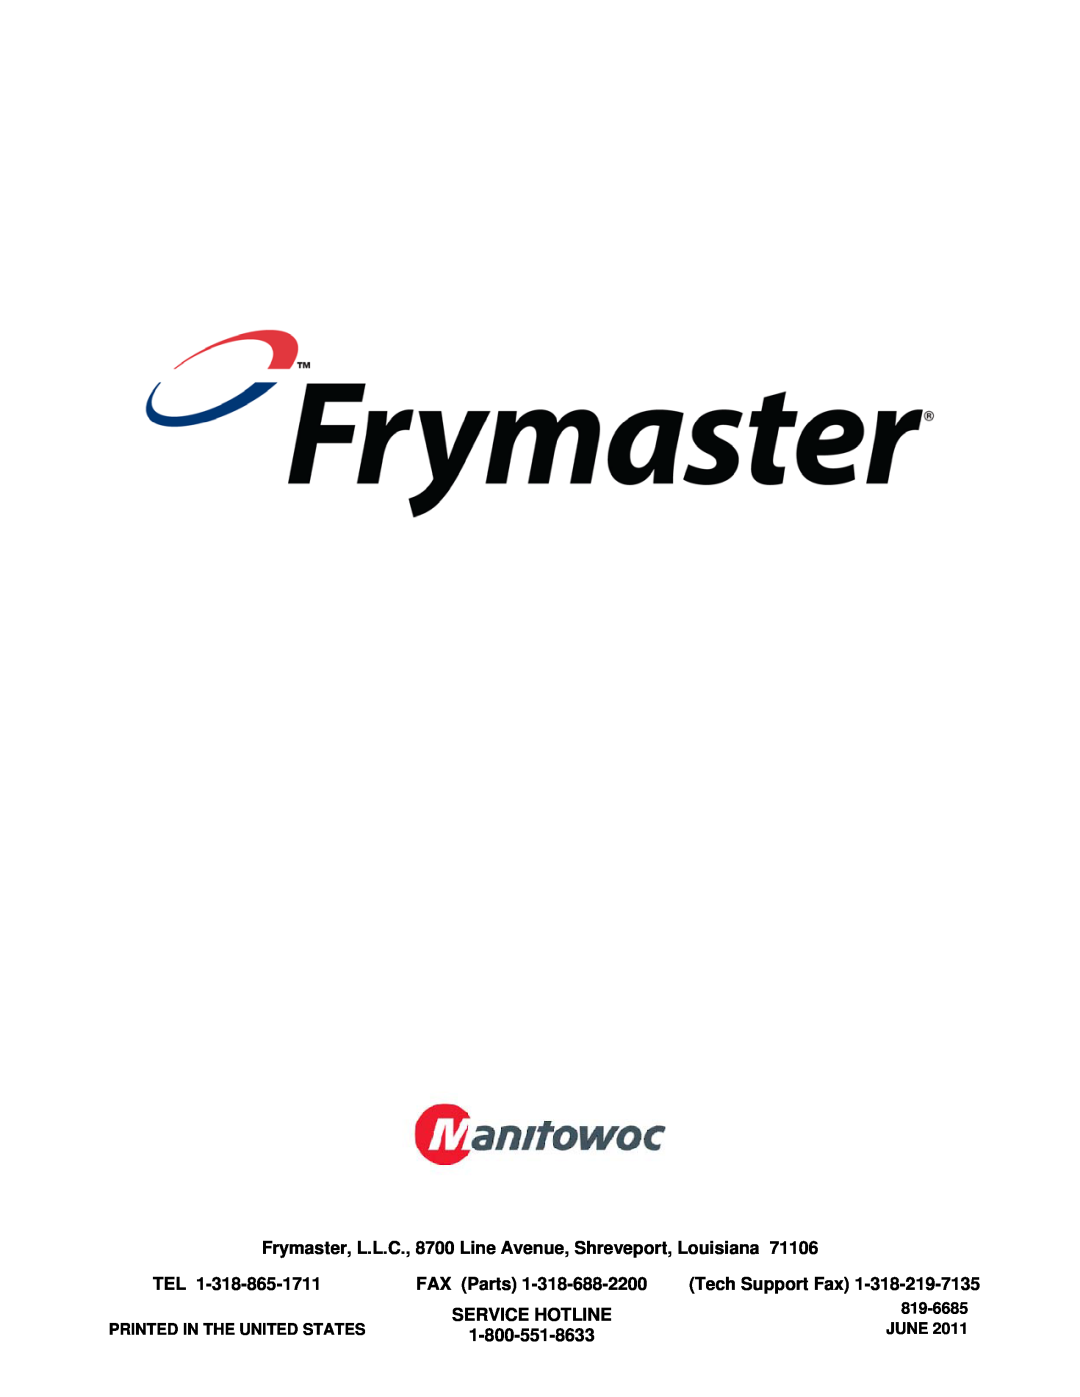 Frymaster OCF30 operation manual FAX Parts, Tech Support Fax, Service Hotline, 819-6685, June 